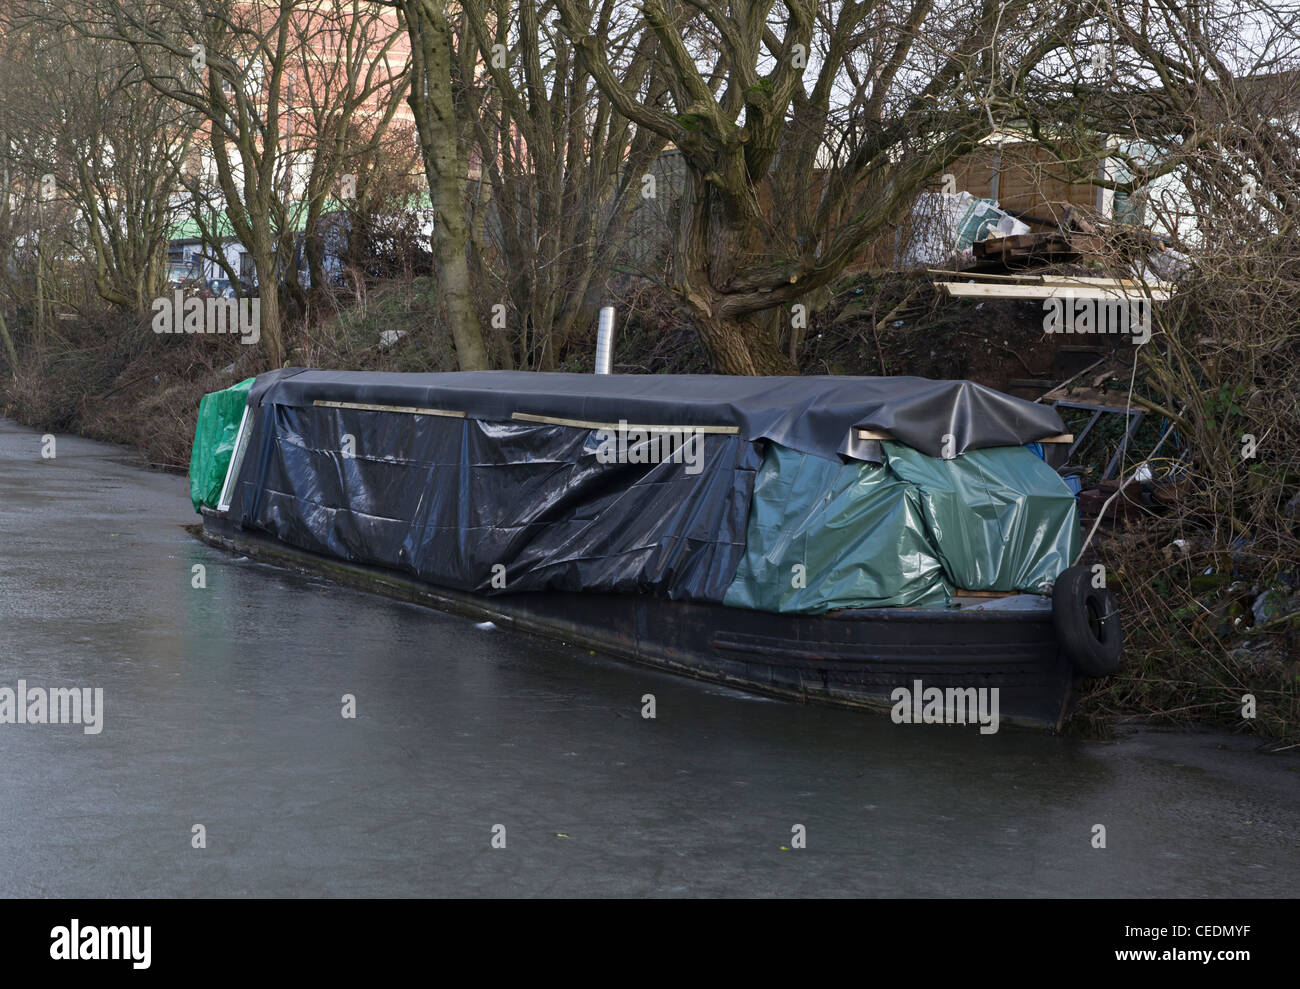 canal narrow boat covered in protective sheeting on a frozen canal Stock Photo